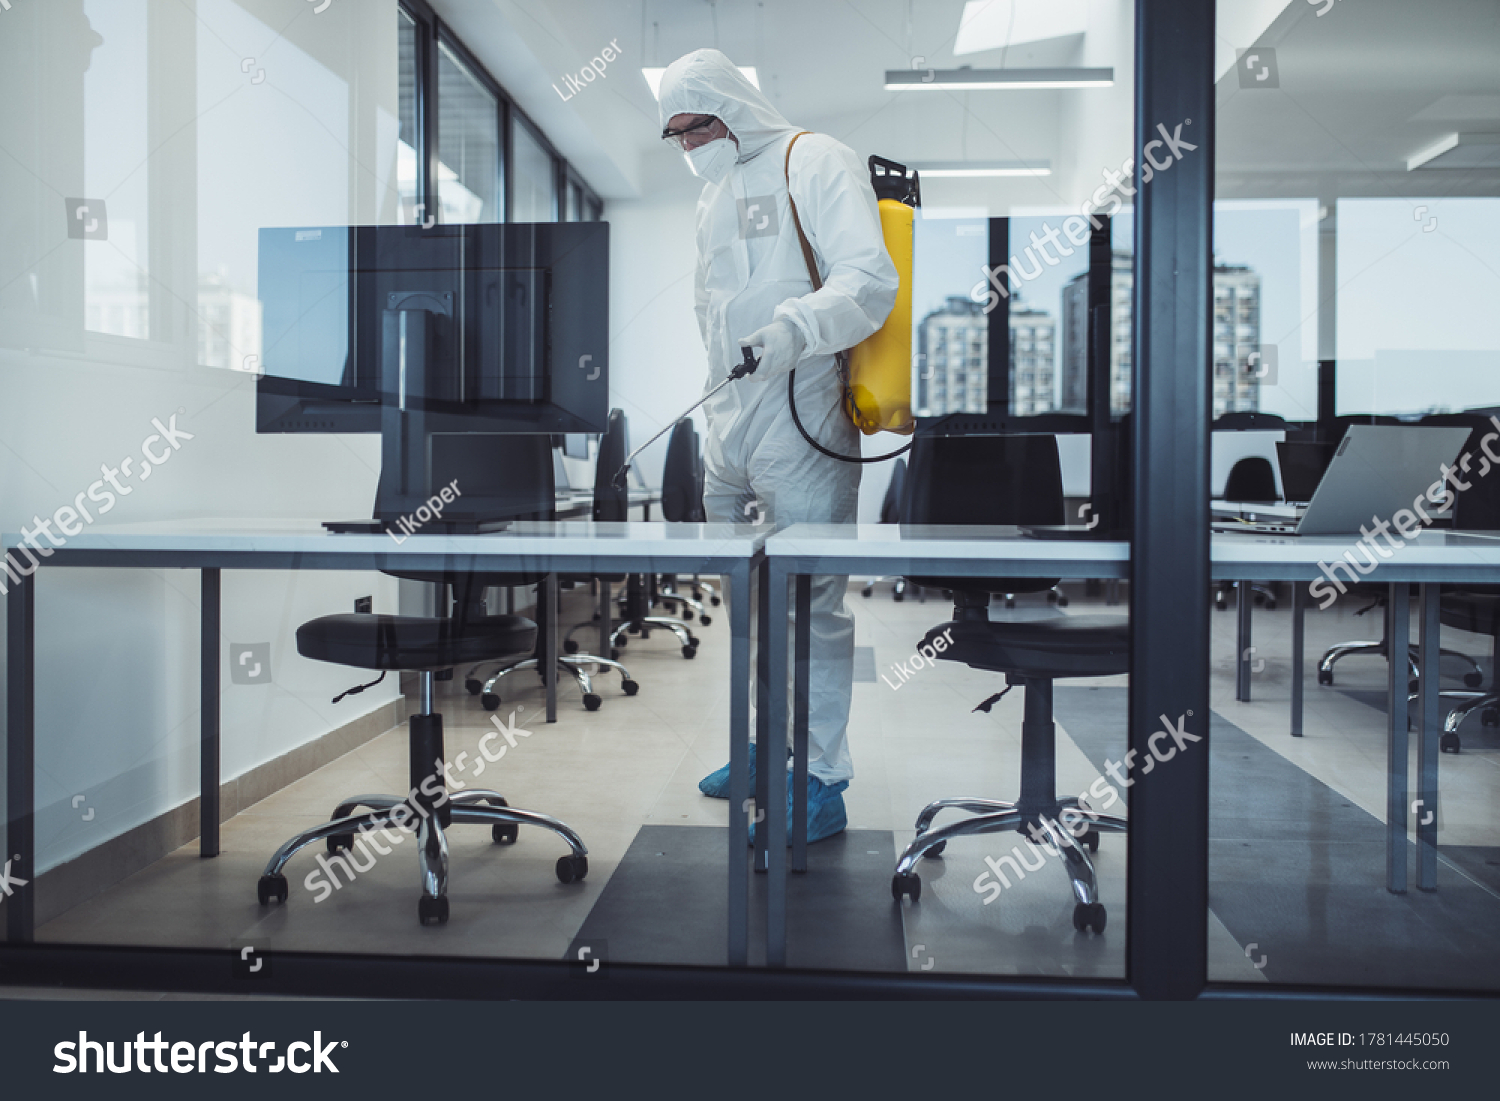 Office disinfection during COVID-19 pandemic. Man in protective suit and face mask spraying for disinfection in the office #1781445050